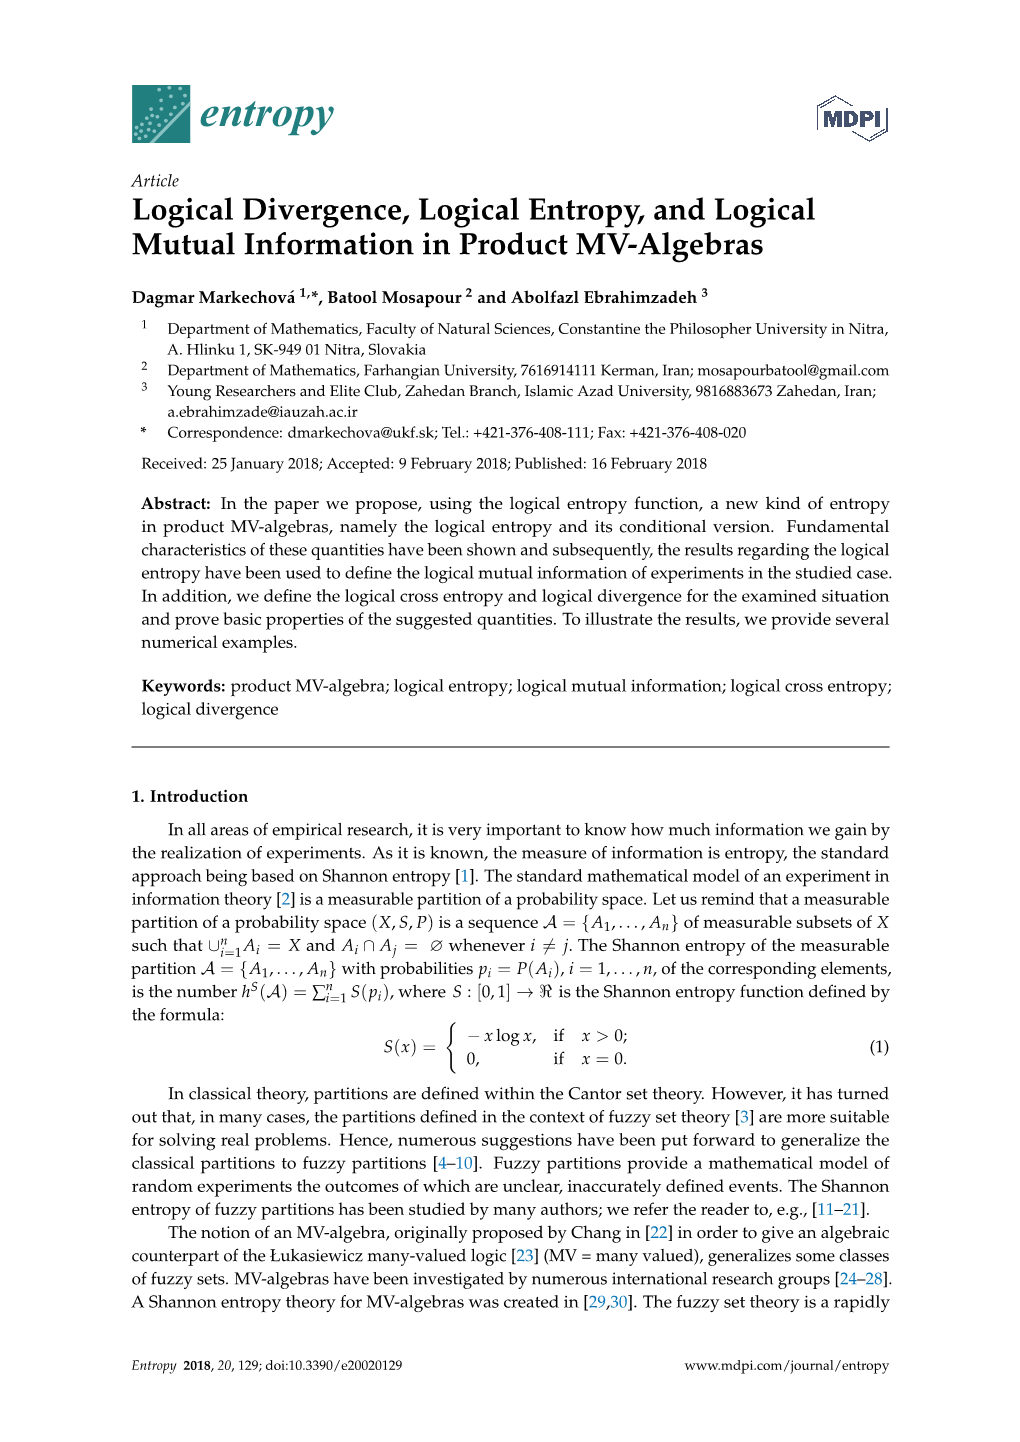 Logical Divergence, Logical Entropy, and Logical Mutual Information in Product MV-Algebras